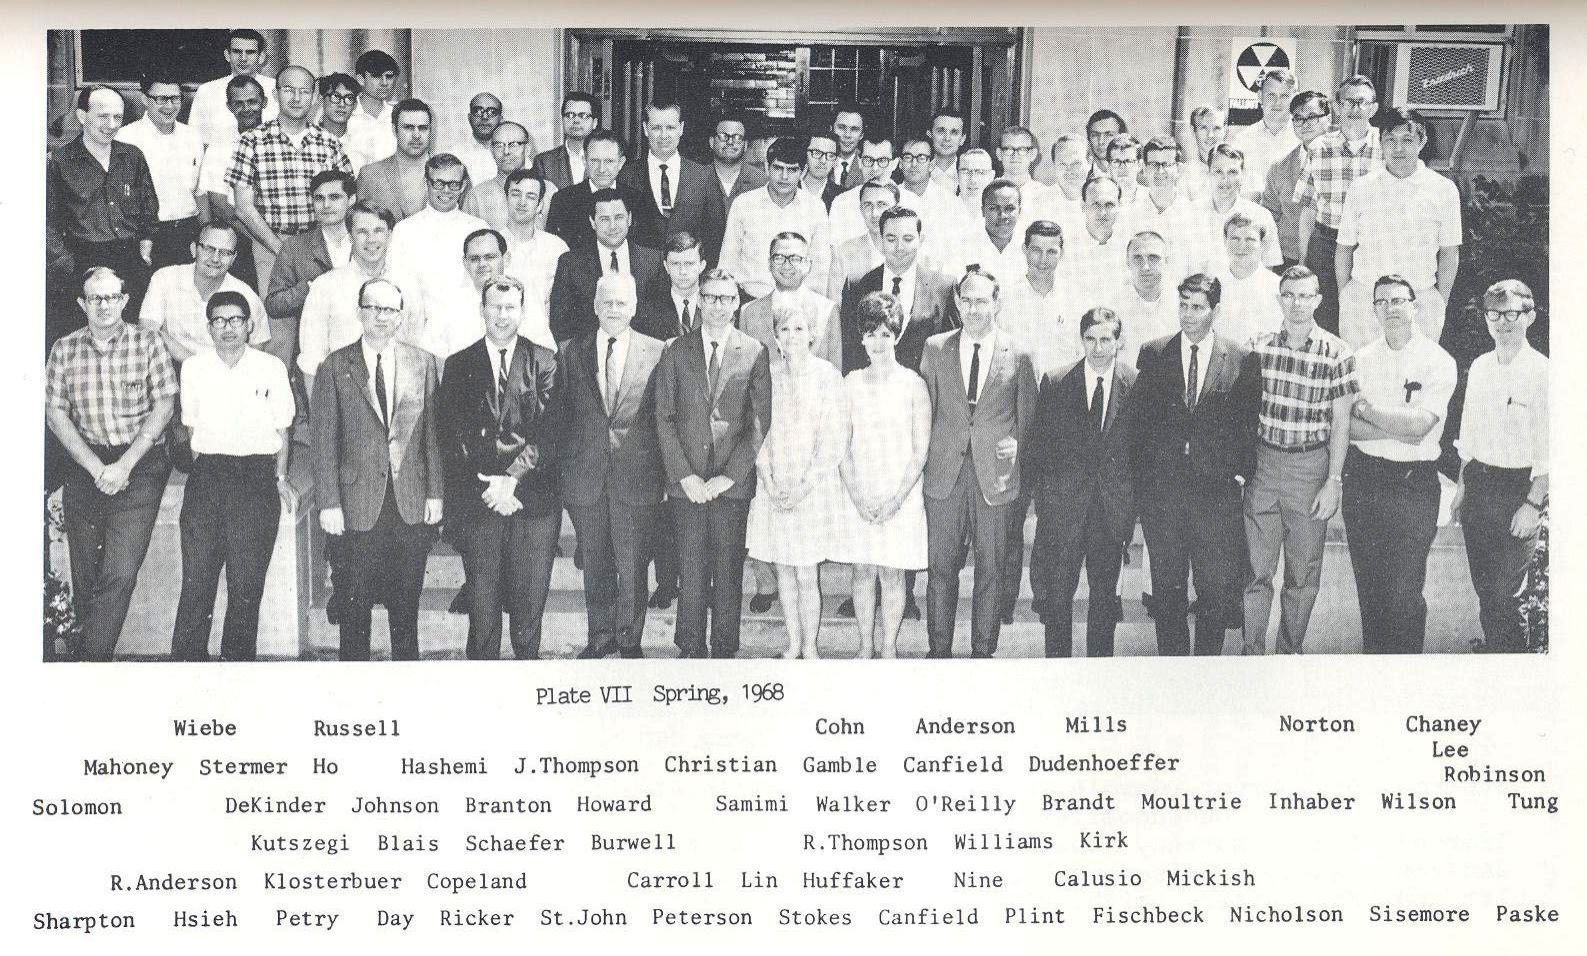 1967-1968 group photo in black and white. Text under photo: "[First line] Plate VII Spring, 1968, [Second line] Wiebe, Russell, Cohn, Anderson, Mills, Norton, Chaney, [Third line] Mahoney, Stermer, Ho, Hashemi, J. Thompson, Christian, Gamble, Canfield, Dudenhoeffer, Lee, Robinson, [Fourth line] Solomon, DeKinder, Johnson, Branton, Howard, Samimi, Walker, O'Reilly, Brandt, Moultrie, Inhaber, Wilson, Tung, [Fifth line] Kutszegi, Blais, Schaefer, Burwell, R. Thompson, Williams, Kirk, [Sixth line] R. Anderson, Klosterbuer, Copeland, Carroll, Lin, Huffaker, Nine, Calusio, Mickish, [Seventh line] Sharpton, Hsieh, Petry, Day, Ricker, St. John, Peterson, Stokes, Canfield, Plint, Fischbeck, Nicholson, Sisemore, Paske."